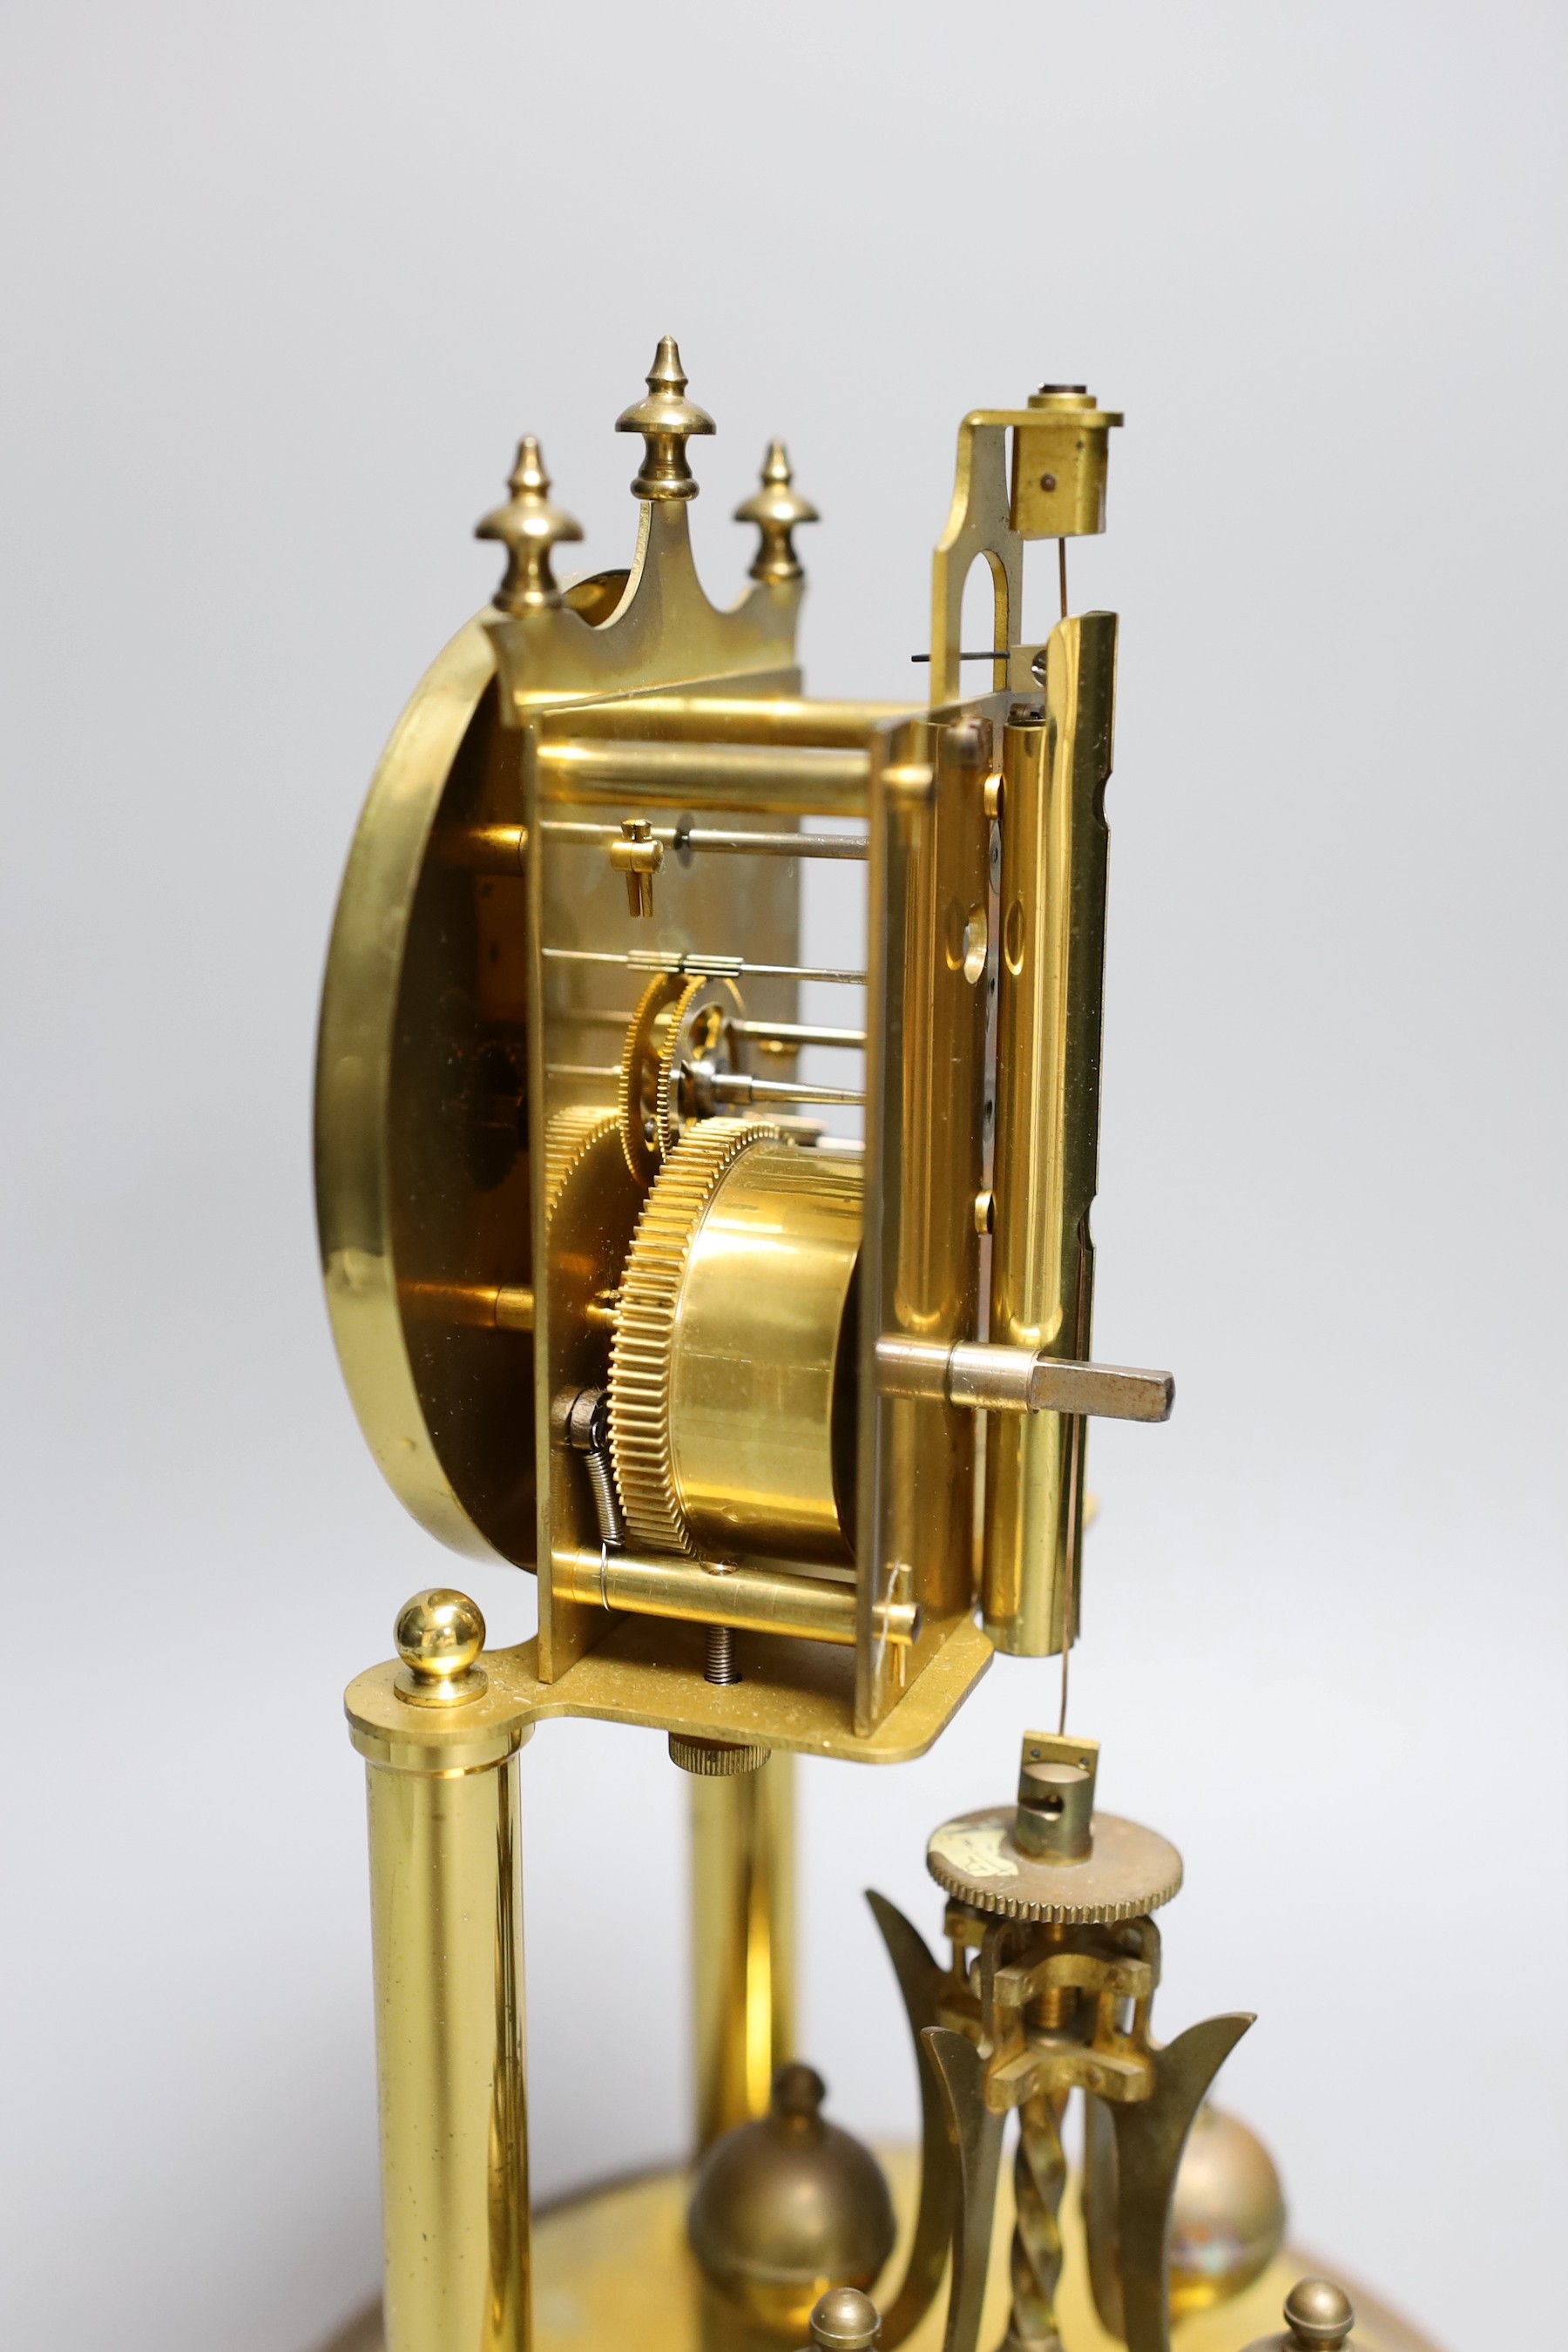 A German 400 day brass mantel timepiece, under a glass dome, 30cm total height